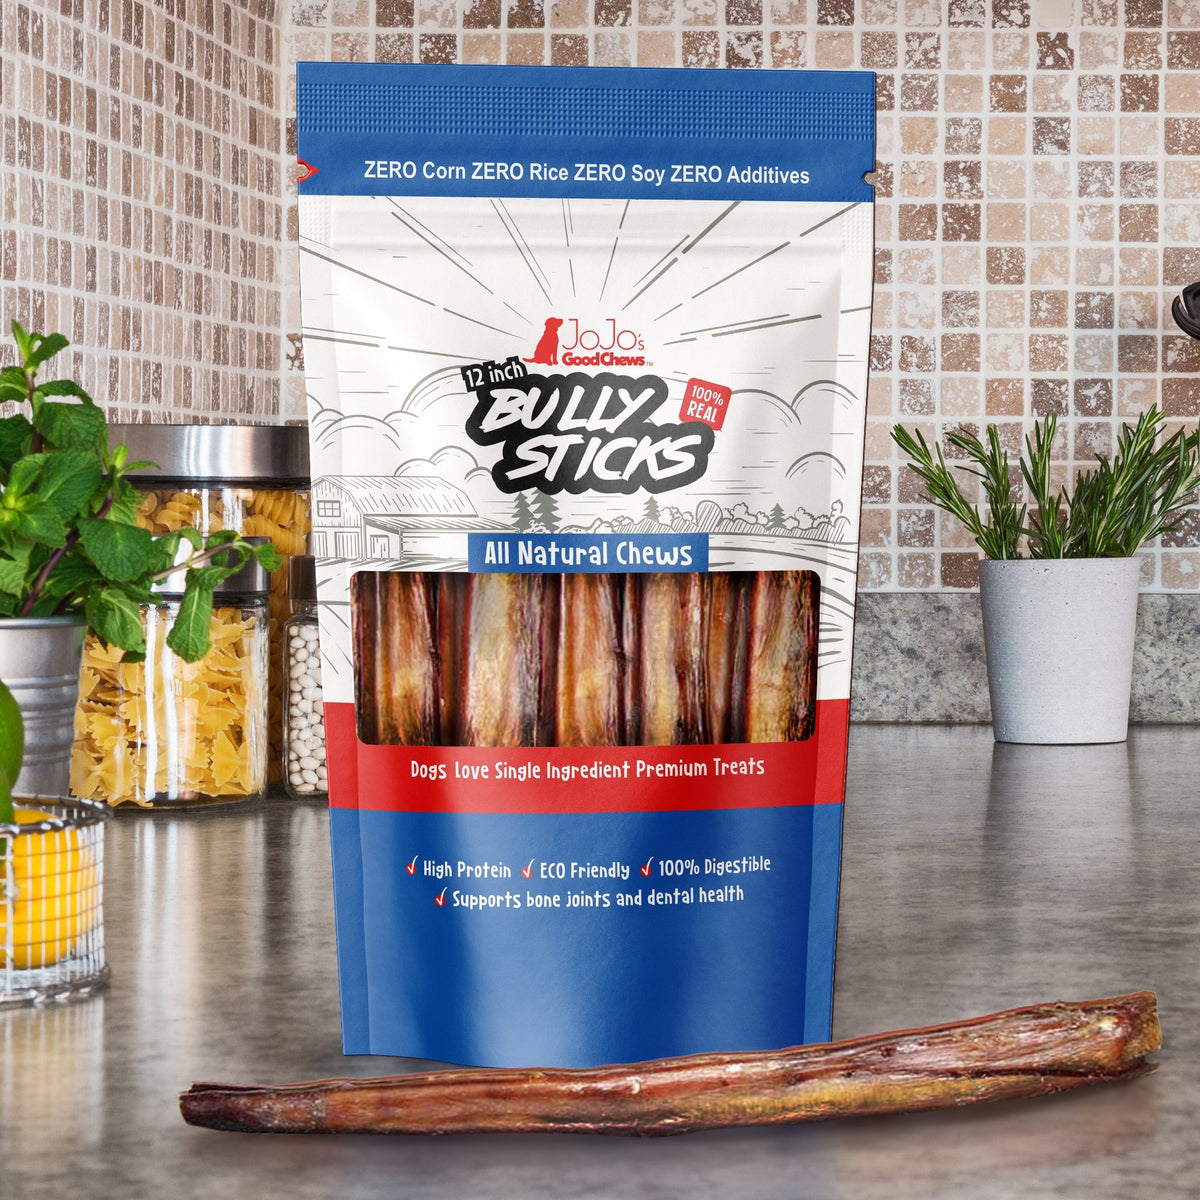 All-Natural Beef Bully Stick Dog Treats - 12" Jumbo (2-Pack) by American Pet Supplies